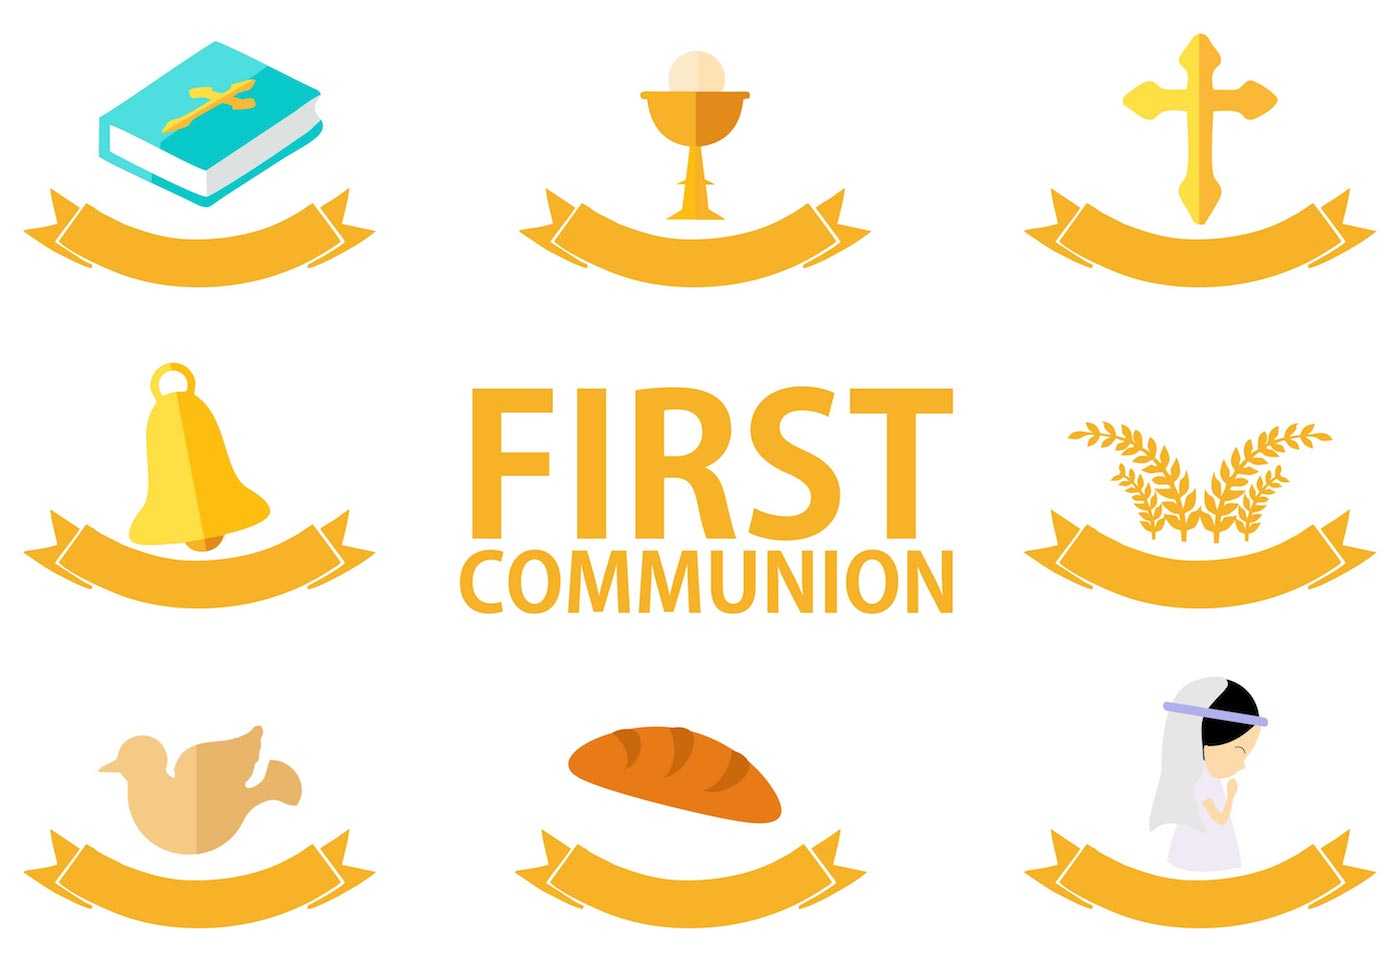 First Communion Template Free Vector Art – (25 Free Downloads) Pertaining To Free Printable First Communion Banner Templates